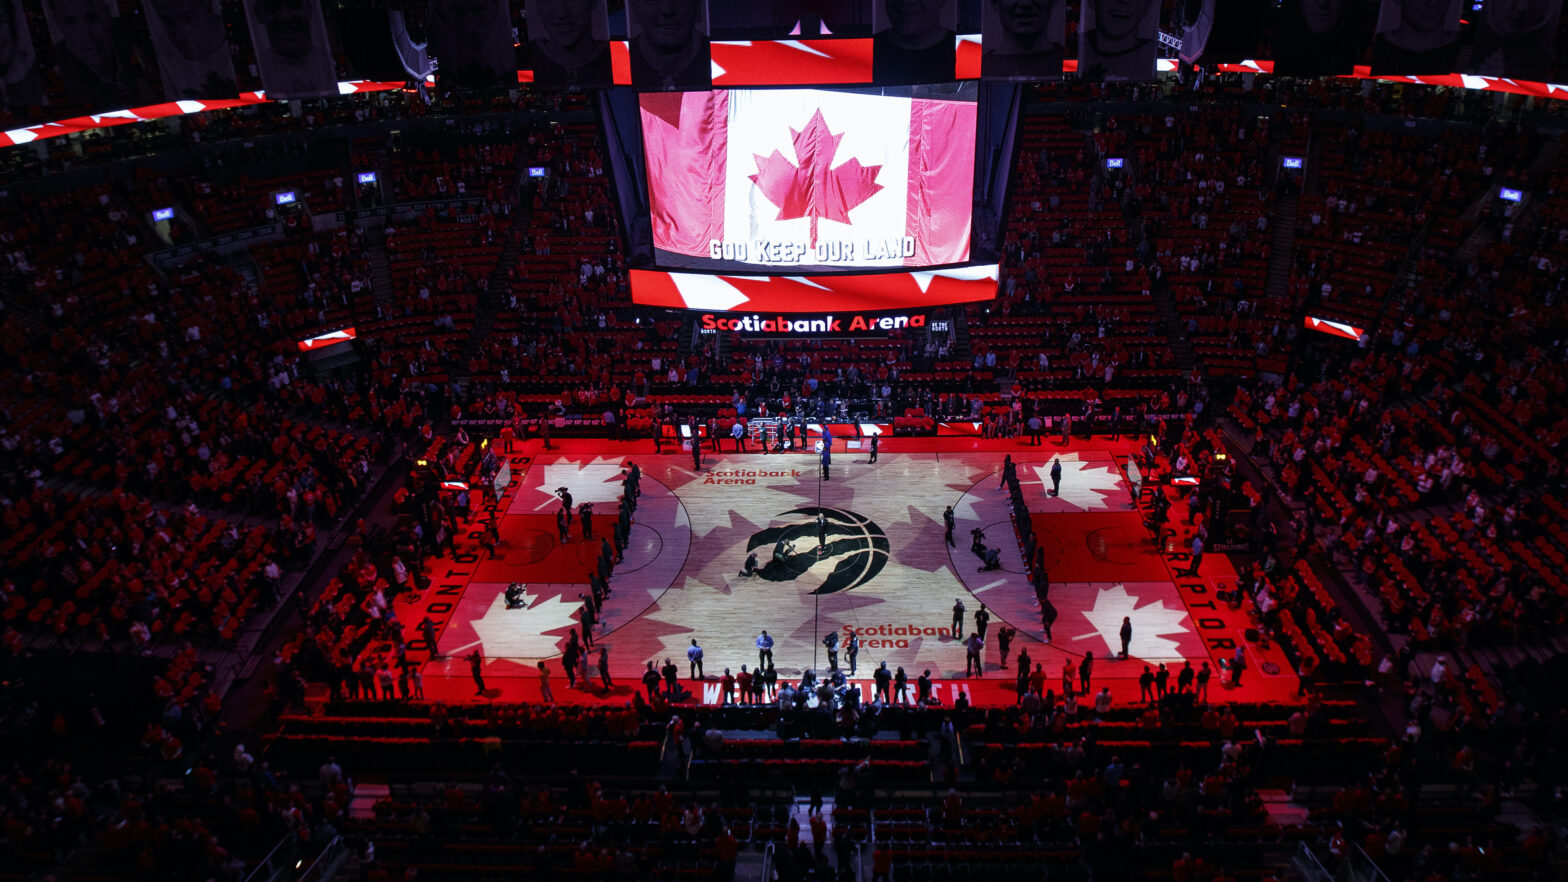 TORONTO, CANADA - MAY 19: Wide angle view of the arena during player introductions before Game Three of the Eastern Conference Finals of the 2019 NBA Playoffs on May 19, 2019 at the Scotiabank Arena in Toronto, Ontario, Canada. NOTE TO USER: User expressly acknowledges and agrees that, by downloading and or using this Photograph, user is consenting to the terms and conditions of the Getty Images License Agreement. Mandatory Copyright Notice: Copyright 2019 NBAE (Photo by Mark Blinch/NBAE via Getty Images)